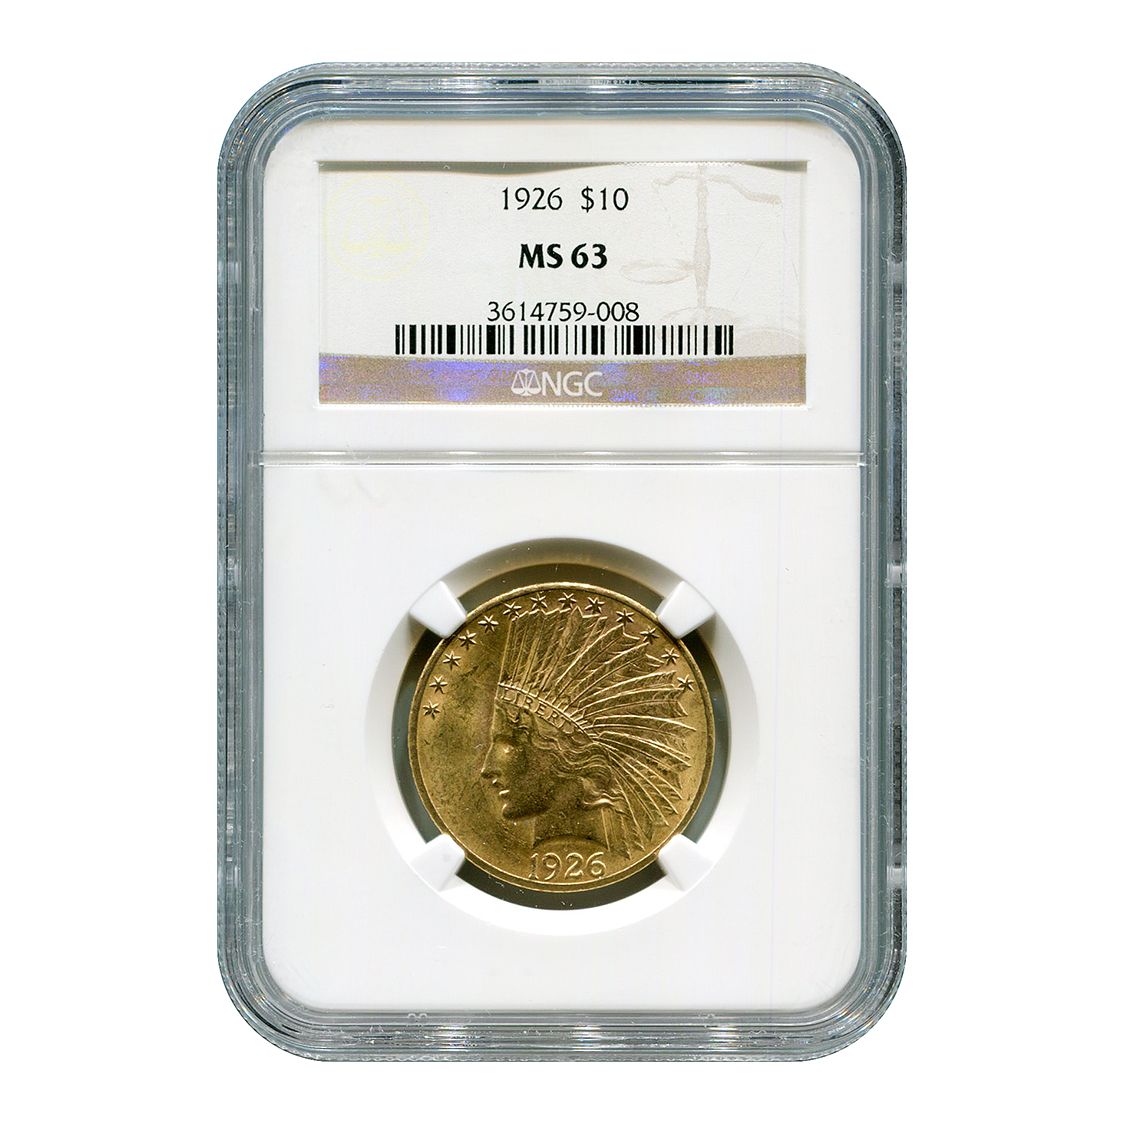 Certified US Gold $10 Indian 1926 MS63 NGC